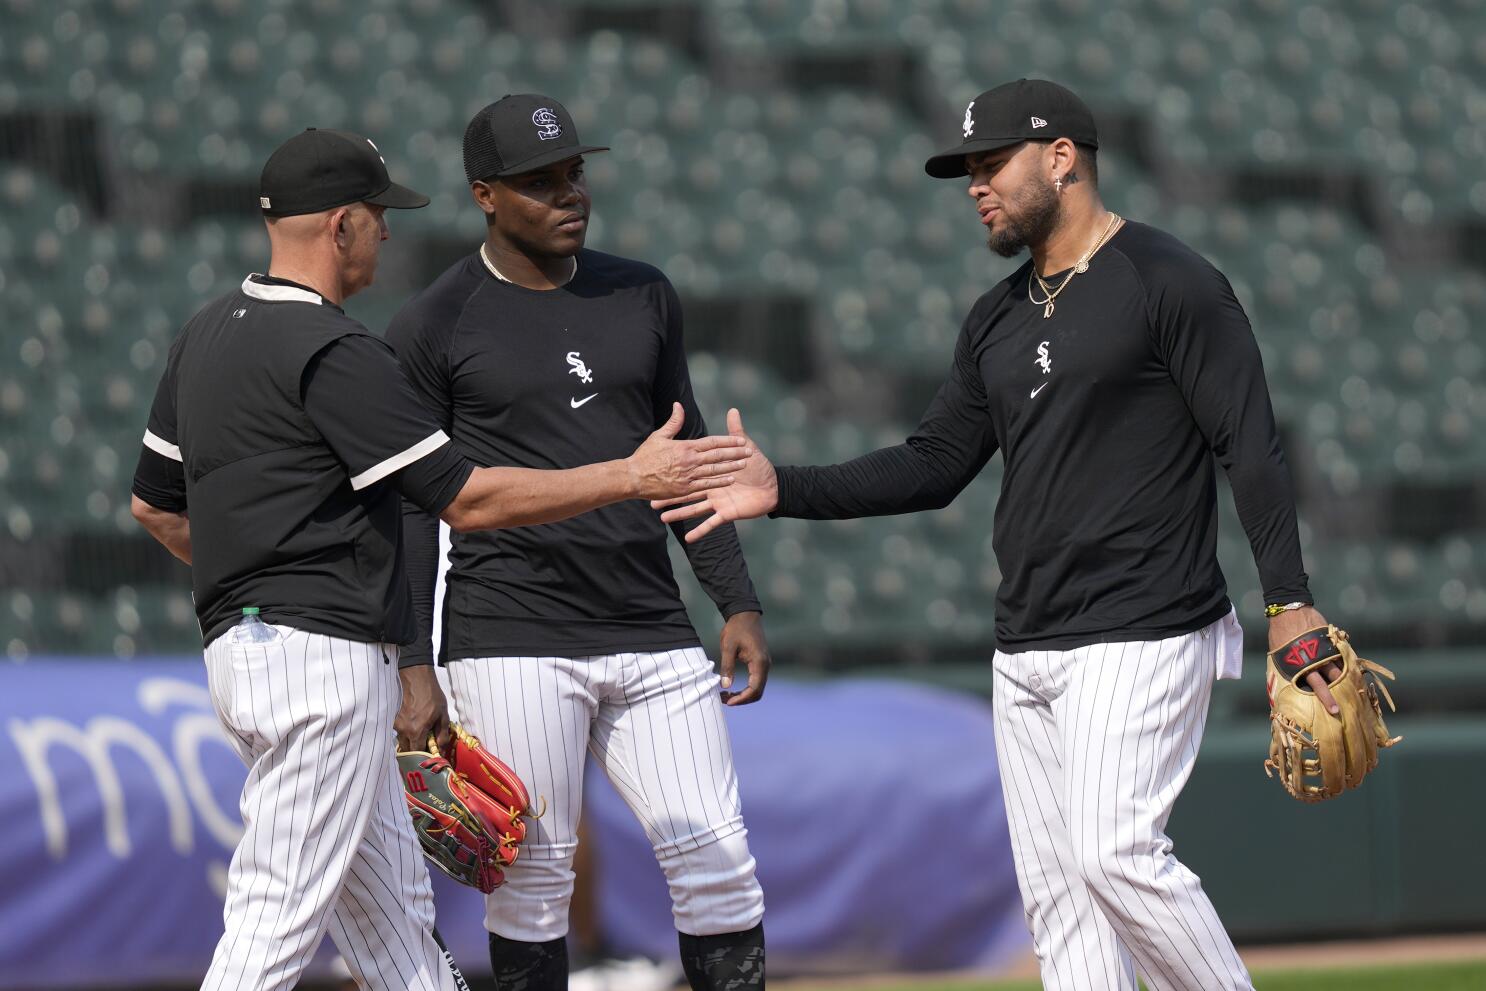 The Chicago White Sox end their losing streak in amazing fashion